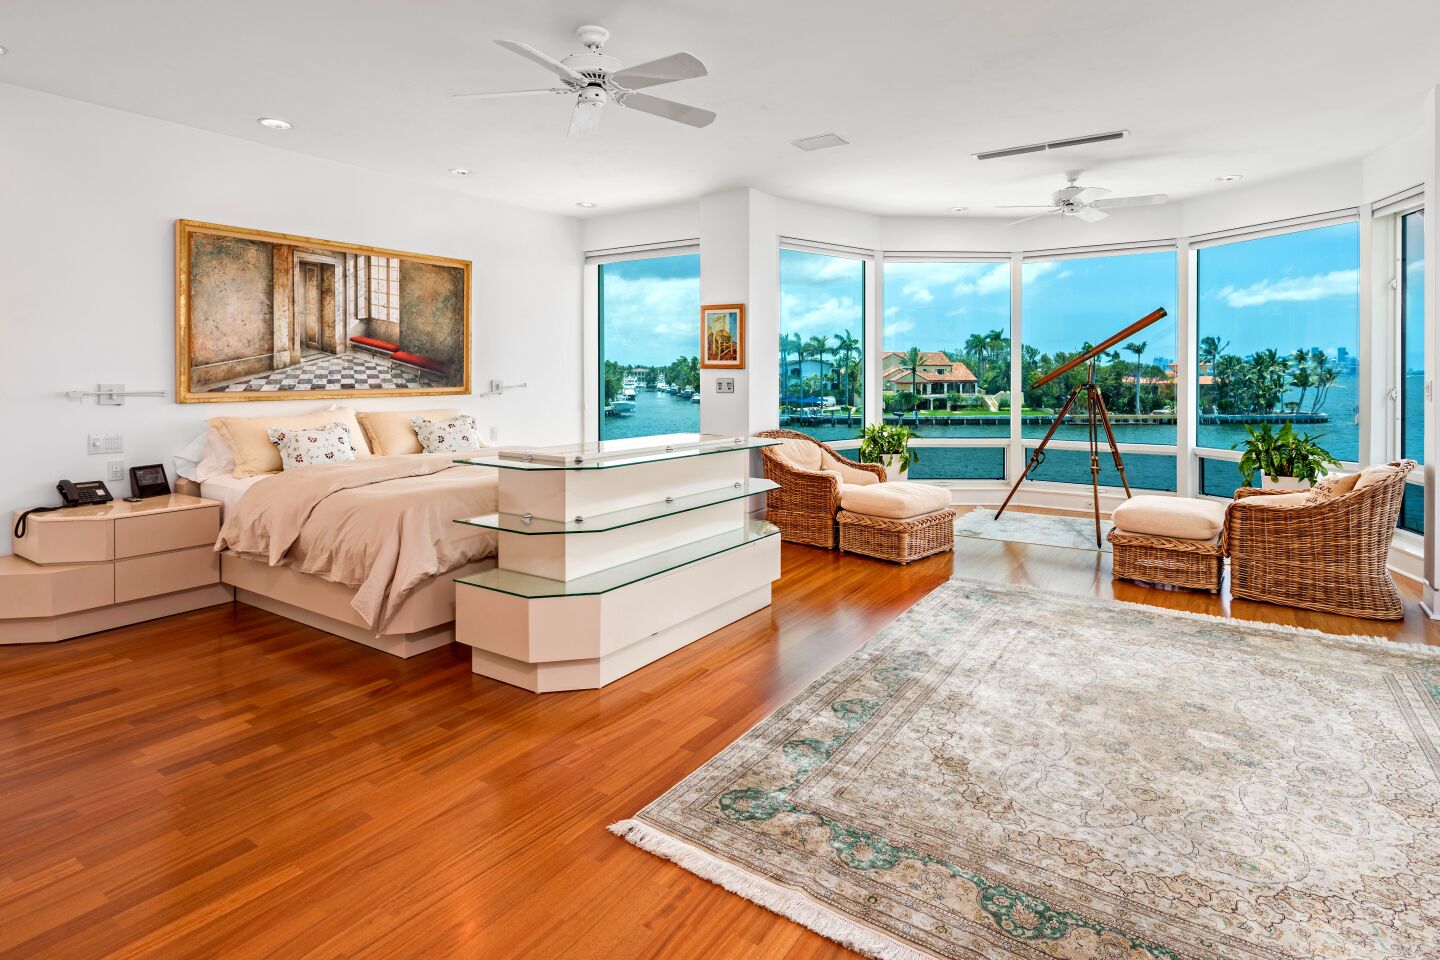 Typical for luxury listings in the Miami area, the home is a sleek mix of tile floors, crisp white walls and glass — lots and lots of glass.